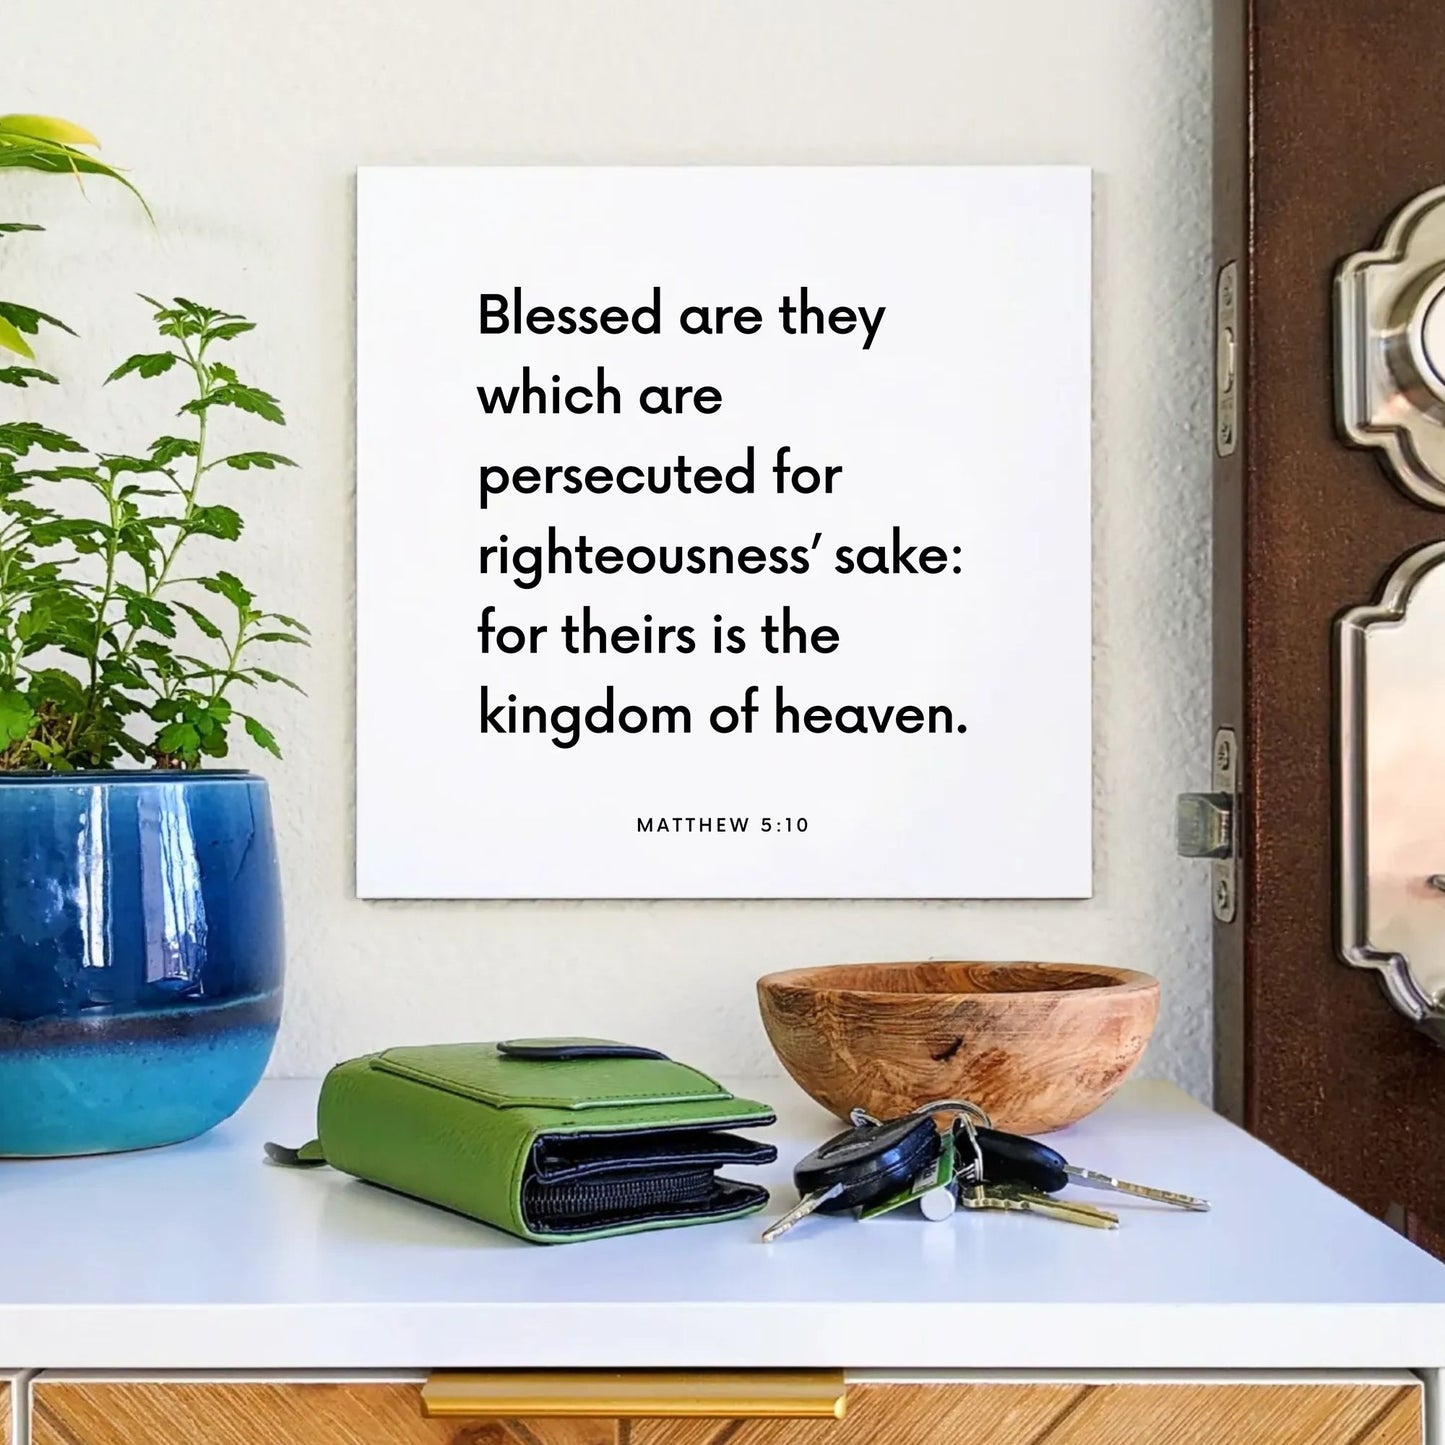 Entryway mouting of the scripture tile for Matthew 5:10 - "Blessed are they which are persecuted for righteousness"